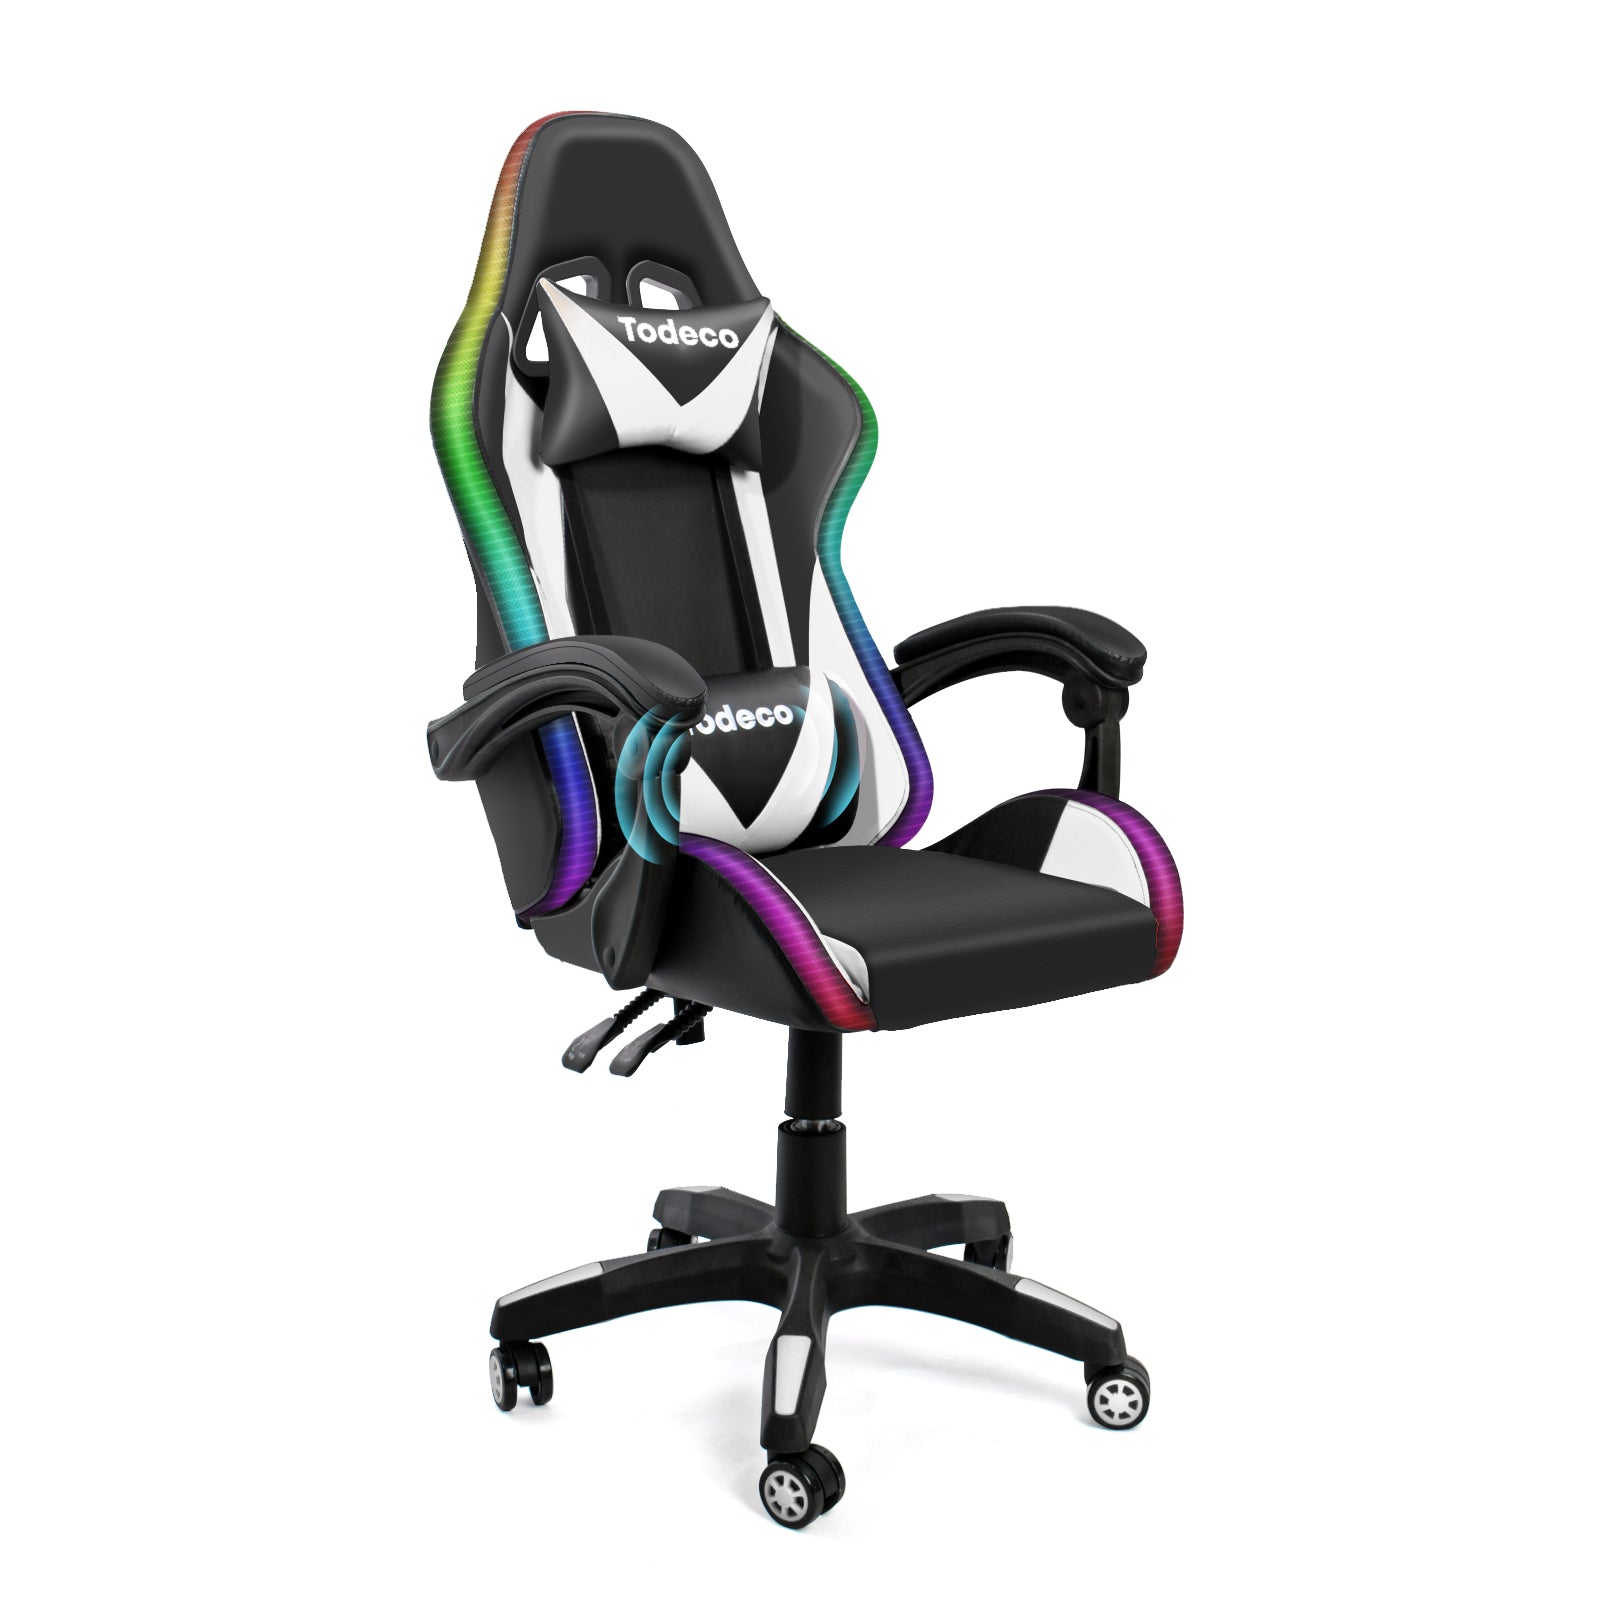 Todeco-Gaming-Massage-Chair-with-LED-Light-Ergonomic-Swivel-Office-Chair-High-Back-Back-and-Adjustable-Seat-Height-Gaming-Chair-with-Massage-Headrest-Lumbar-Support-White